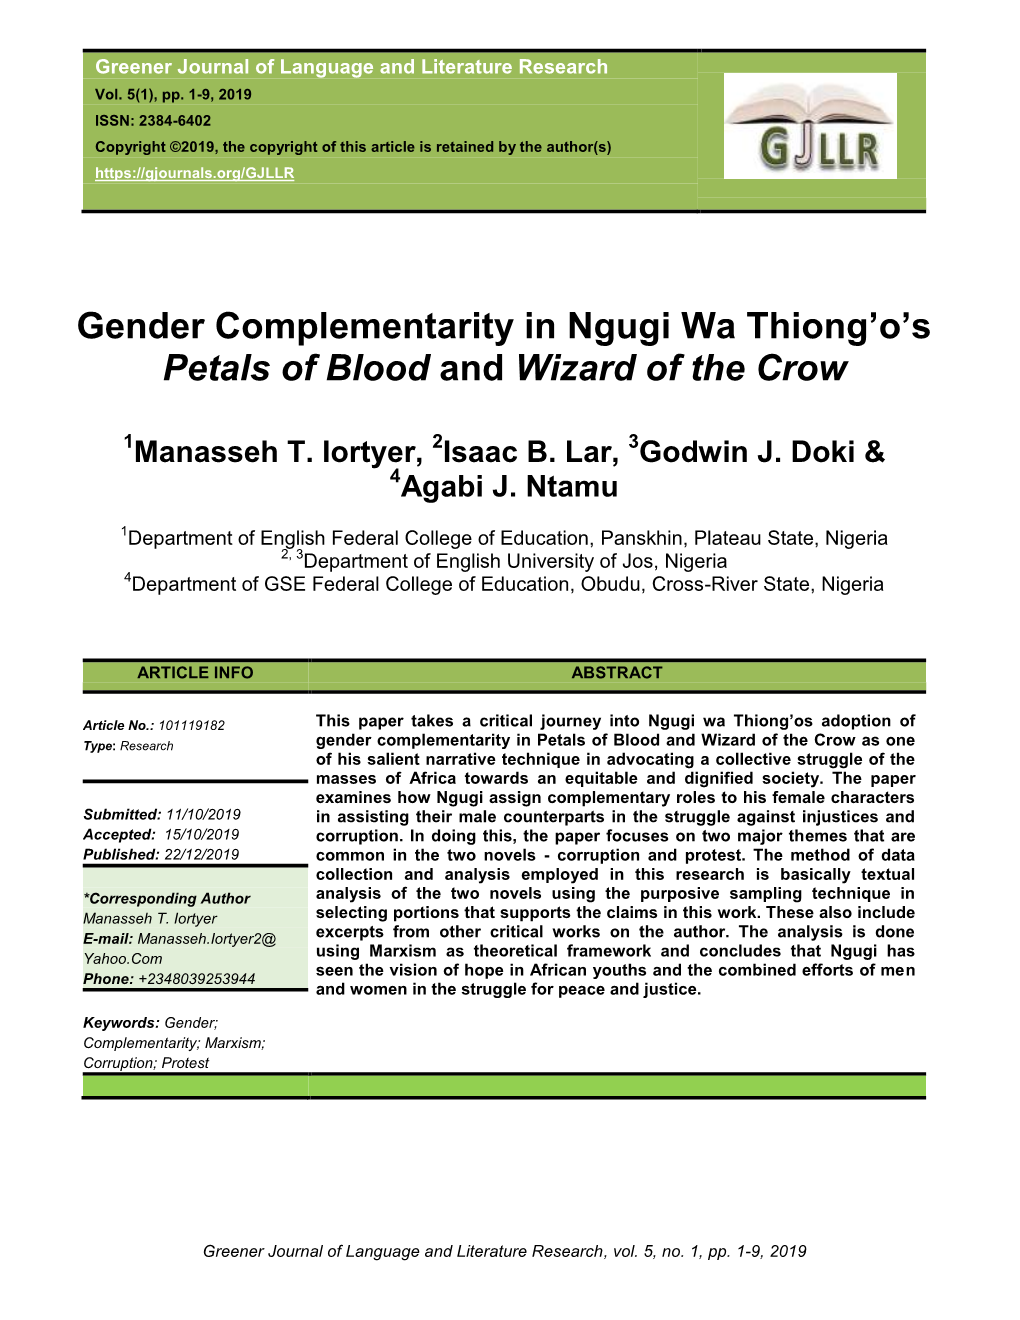 Gender Complementarity in Ngugi Wa Thiong'o's Petals of Blood And